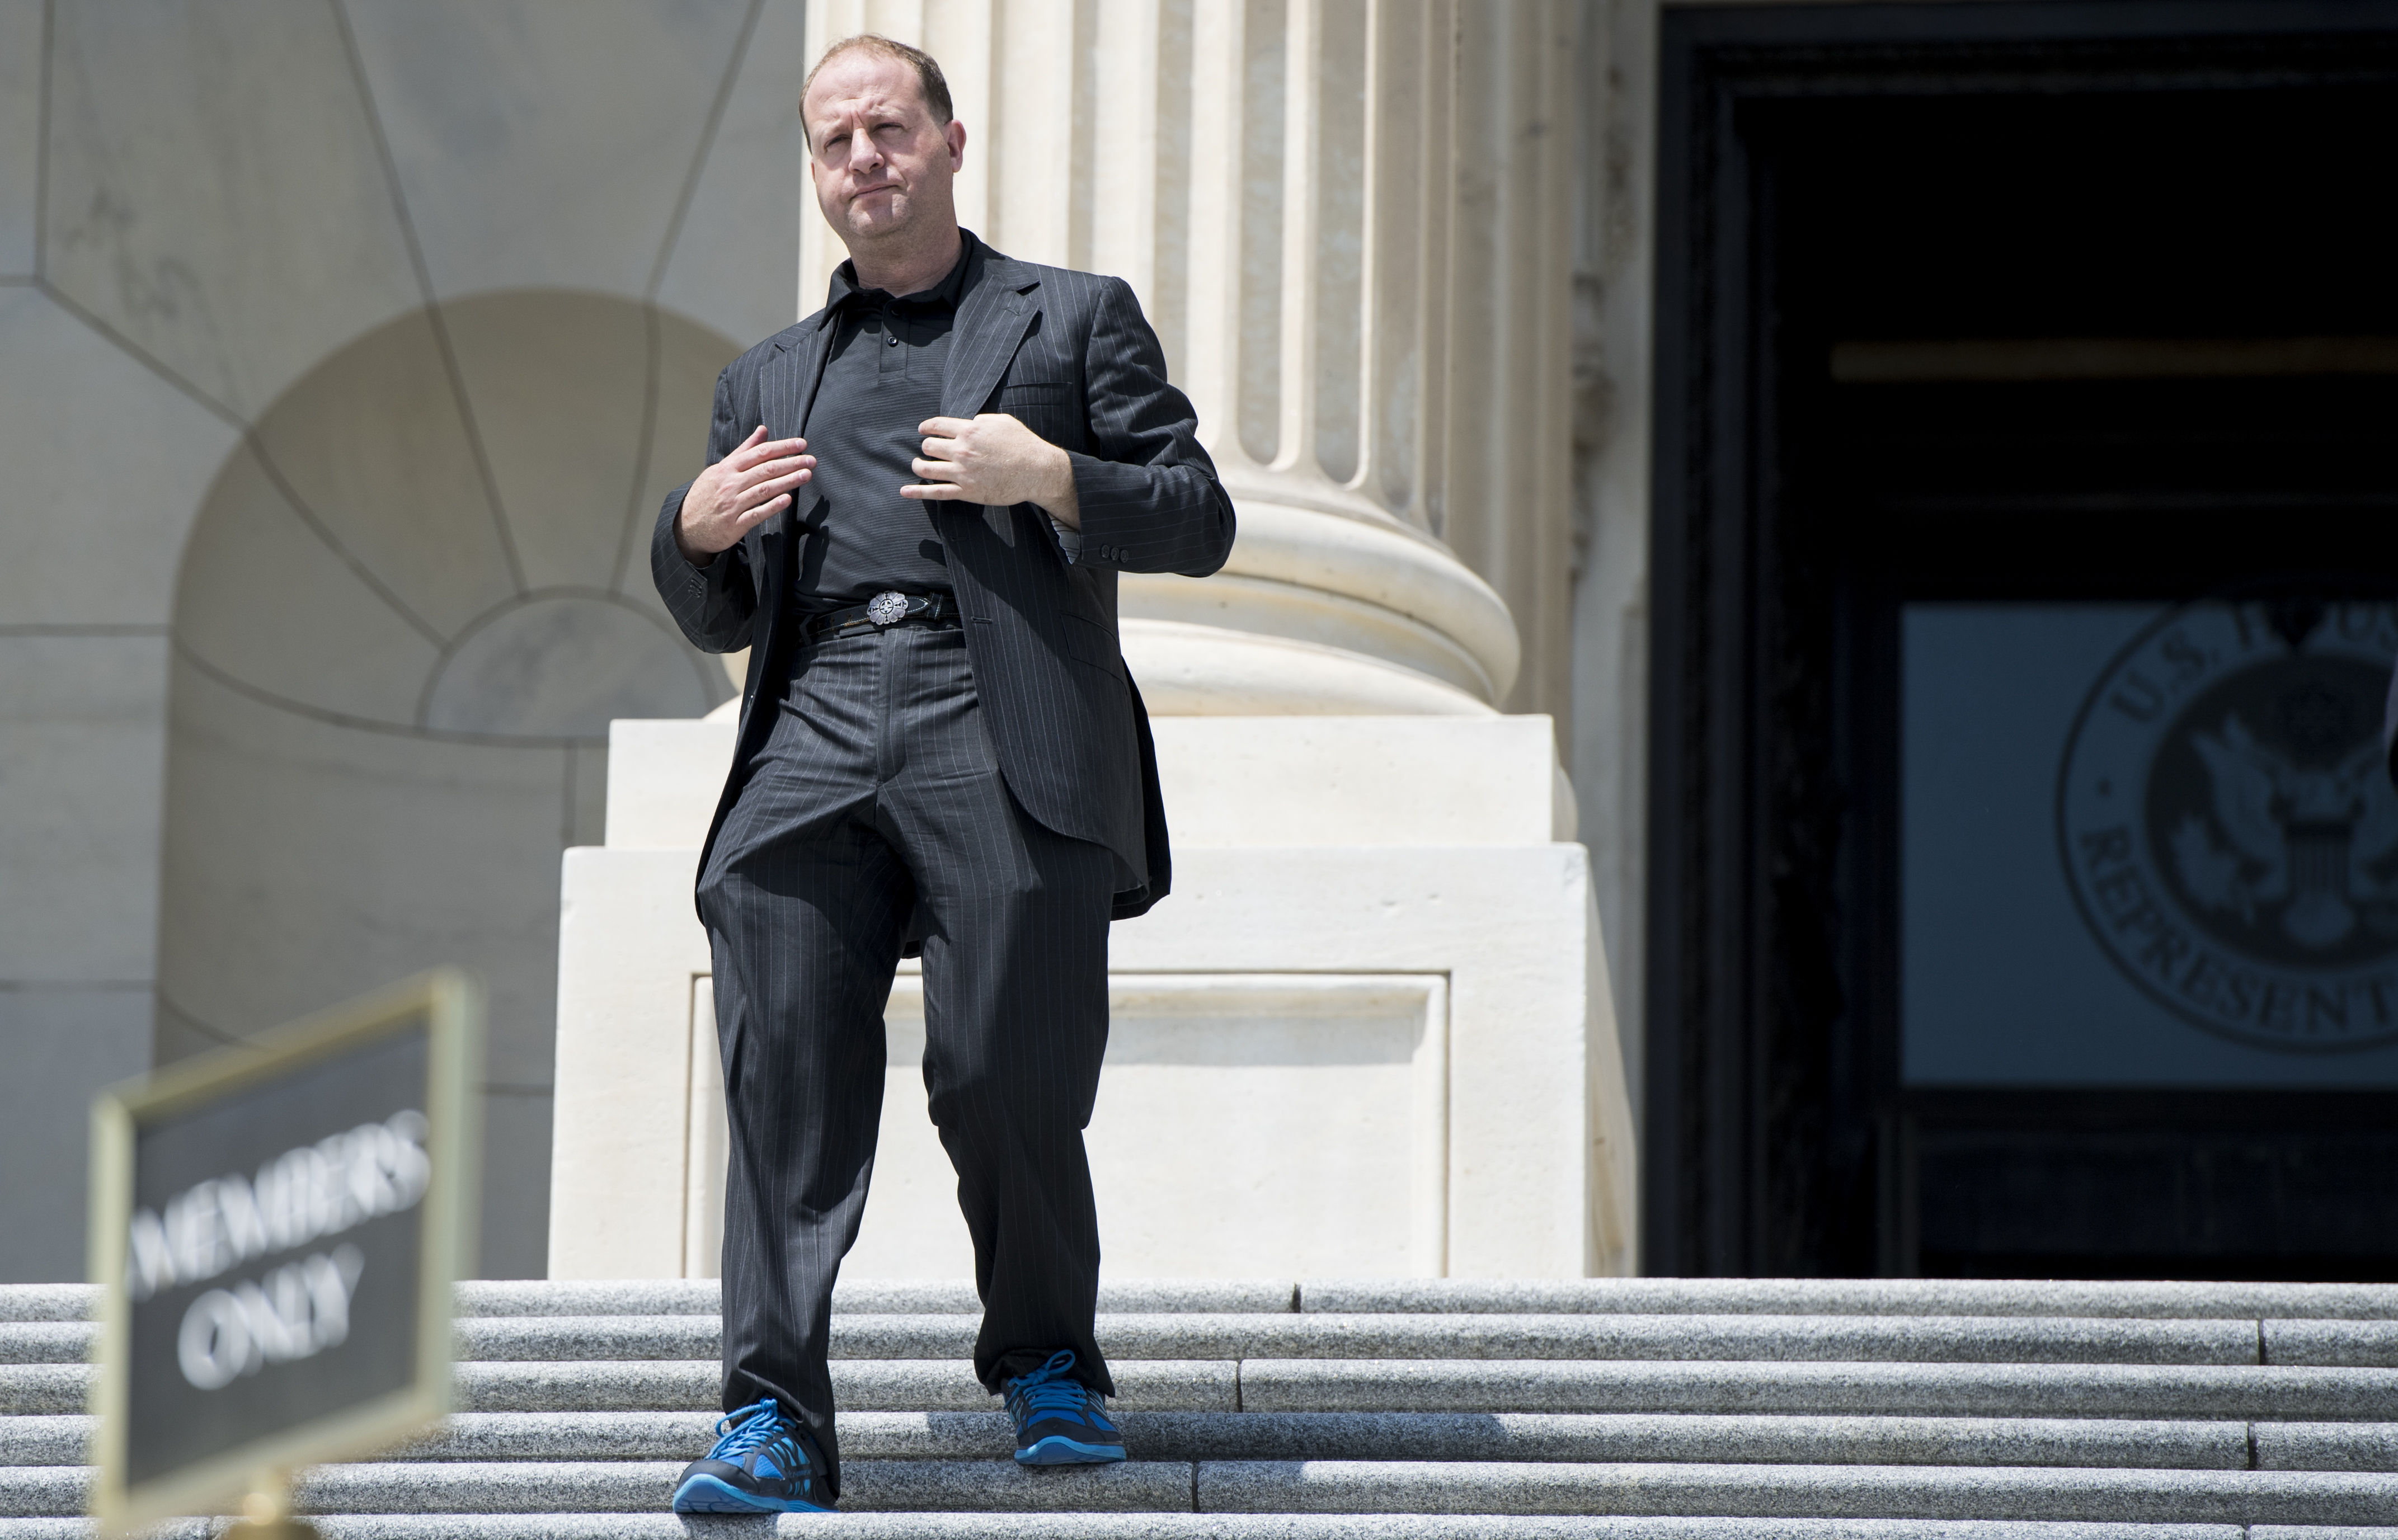 Rep. Jared Polis, D-Colo., walks down the House steps after the last vote before the August recess on Thursday, July 26, 2018. (Photo By Bill Clark/CQ Roll Call) (Bill Clark—CQ-Roll Call,Inc.)